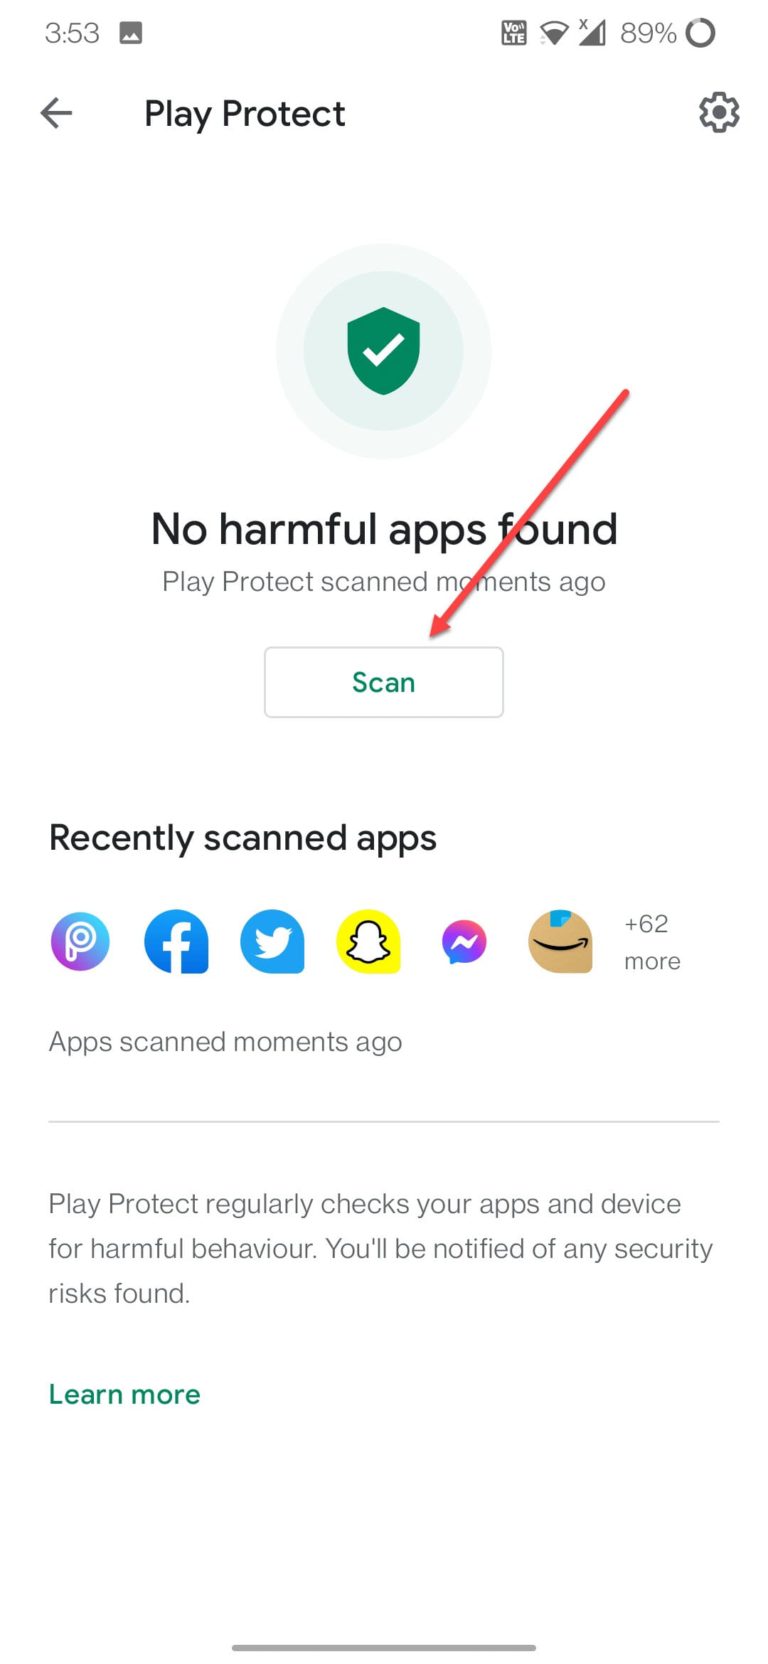 How to find malicious apps on Android?